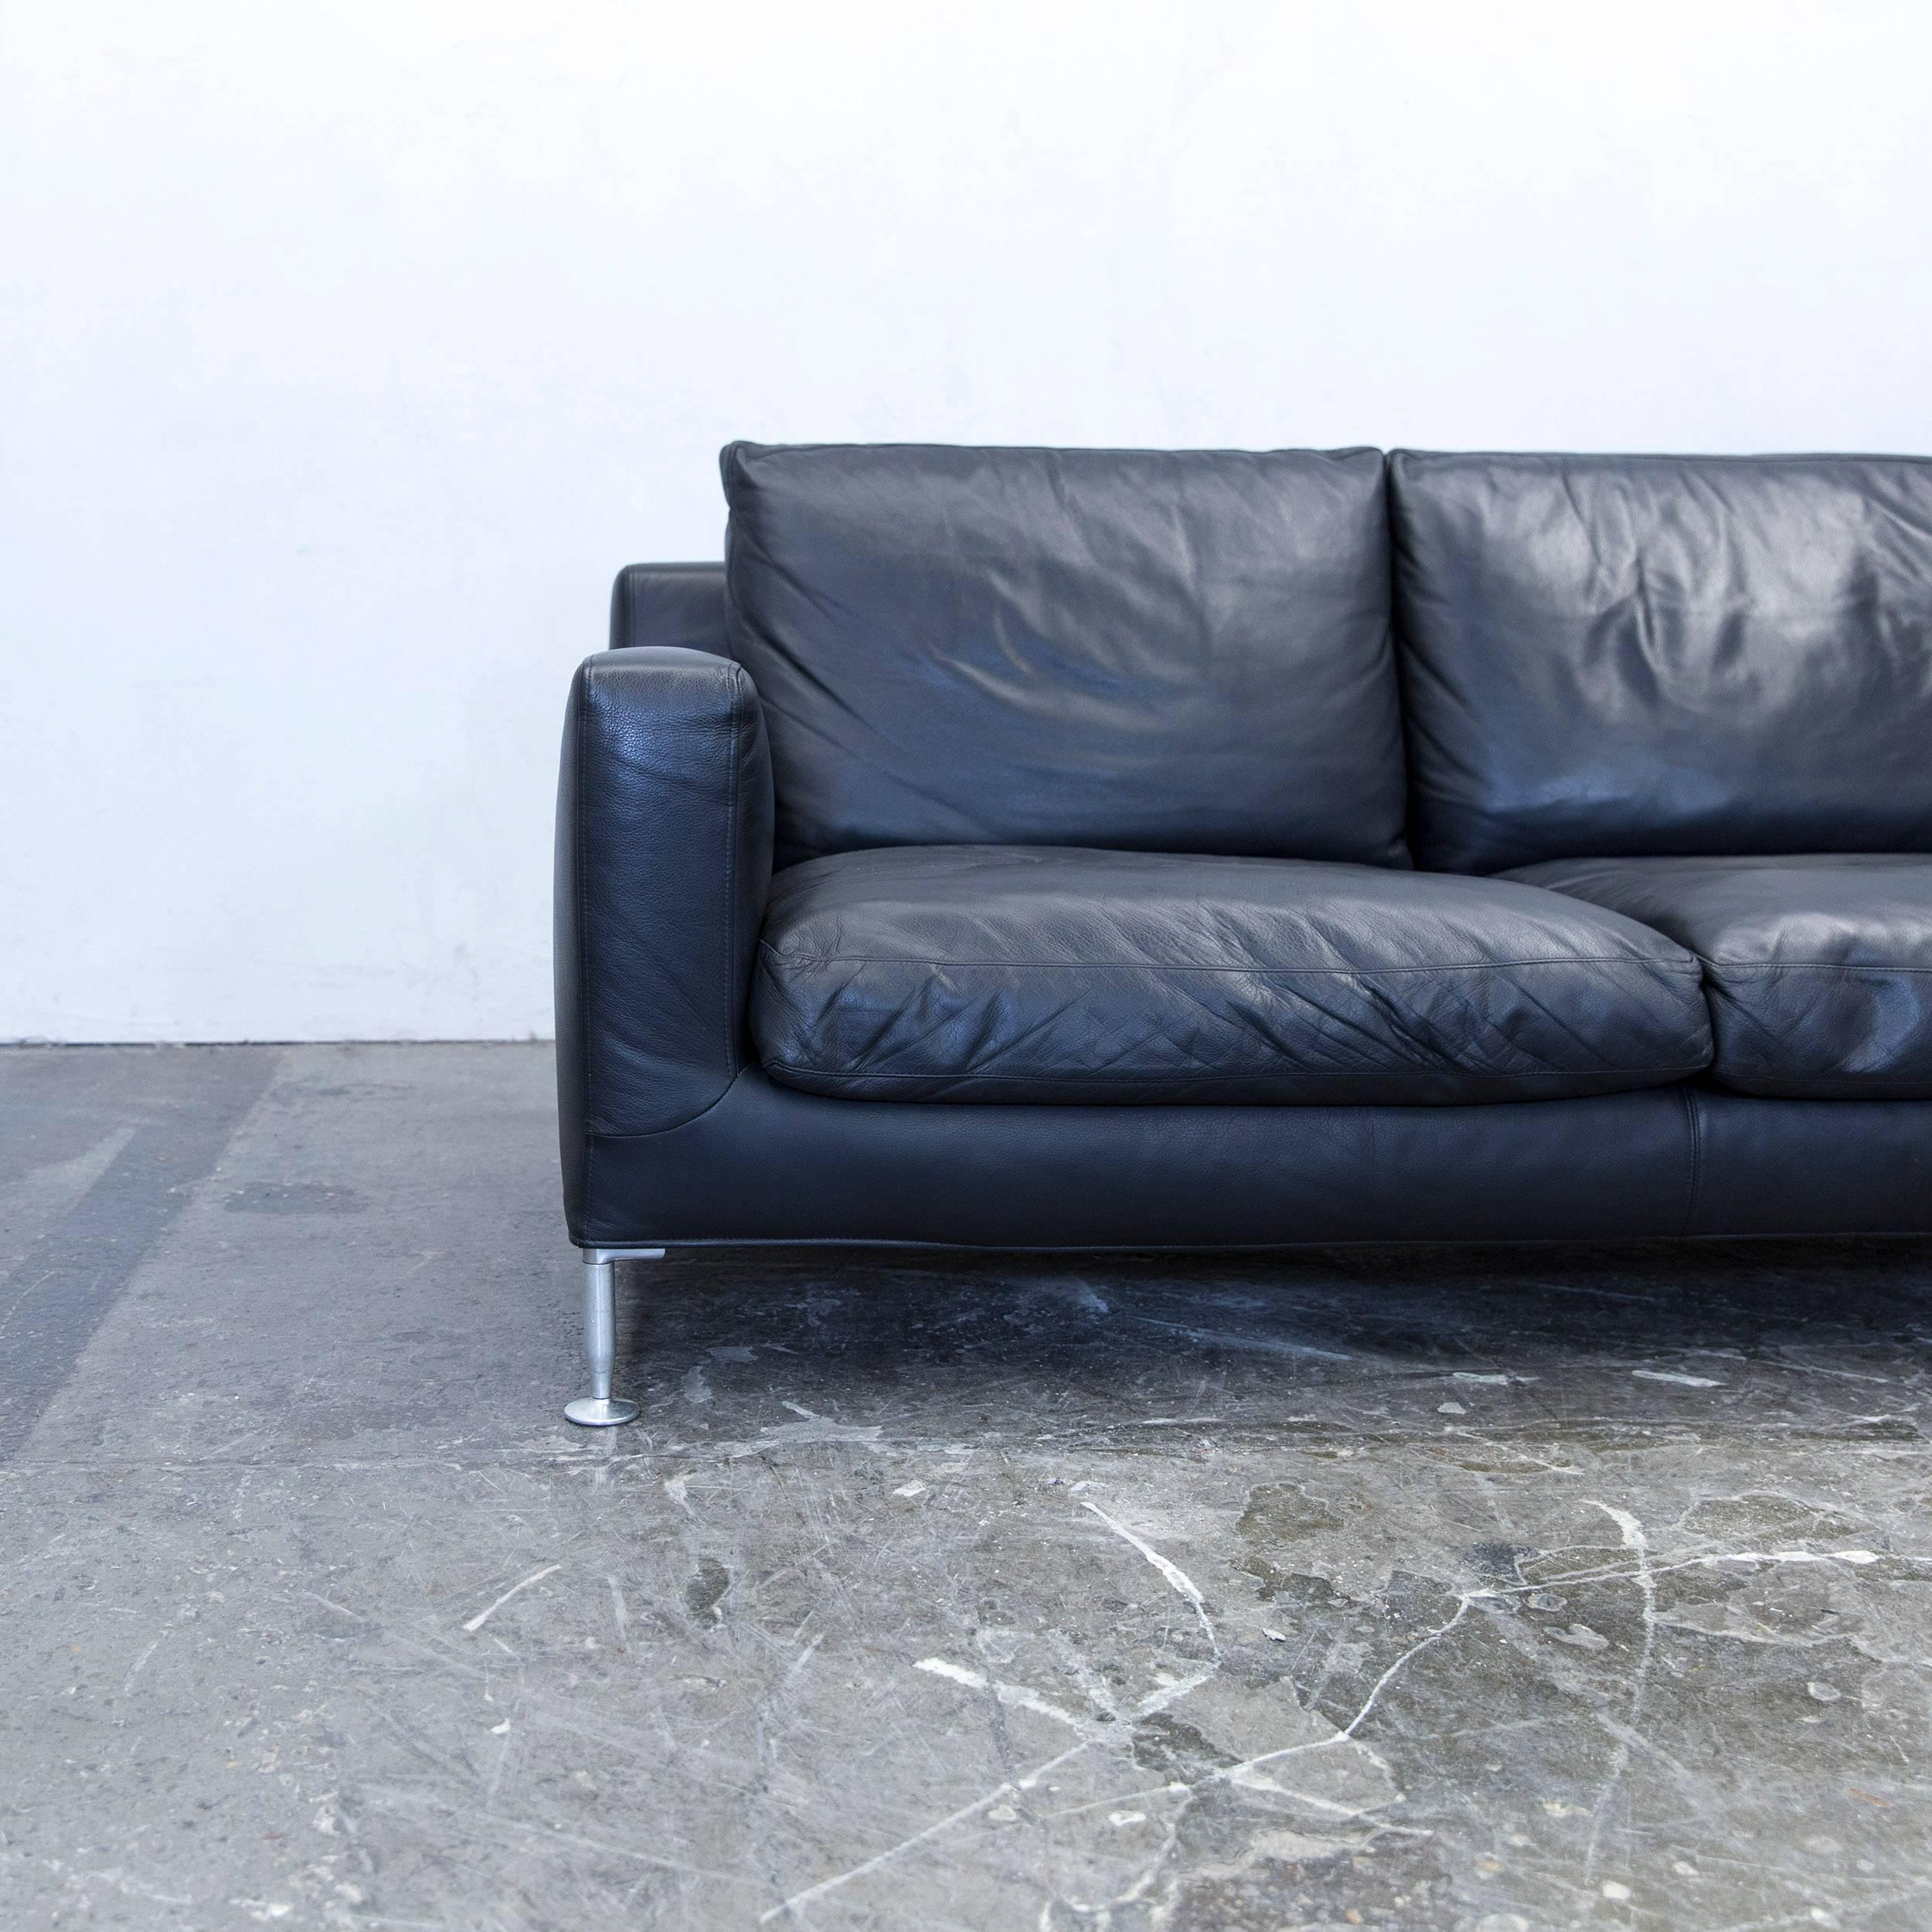 Black colored original B&B Italia Harry designer leather sofa, in a minimalistic and modern design, made for pure comfort and style.